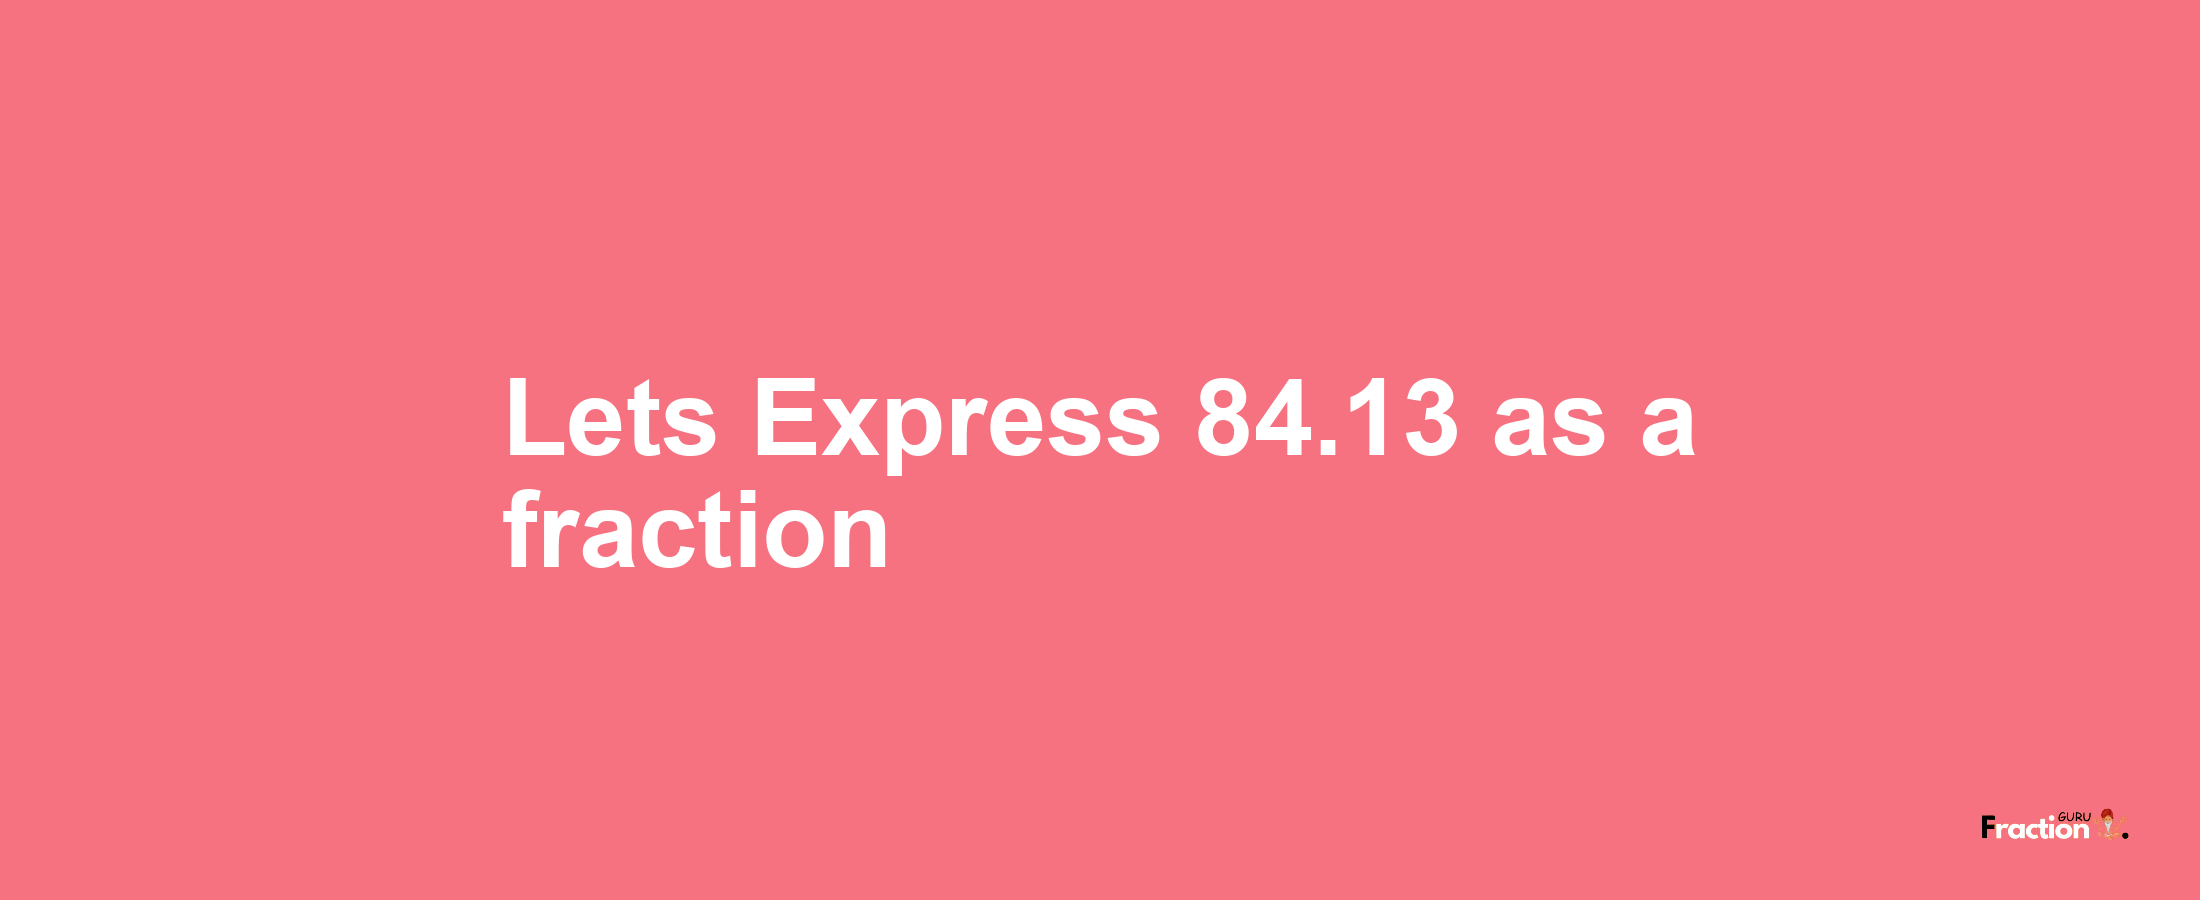 Lets Express 84.13 as afraction